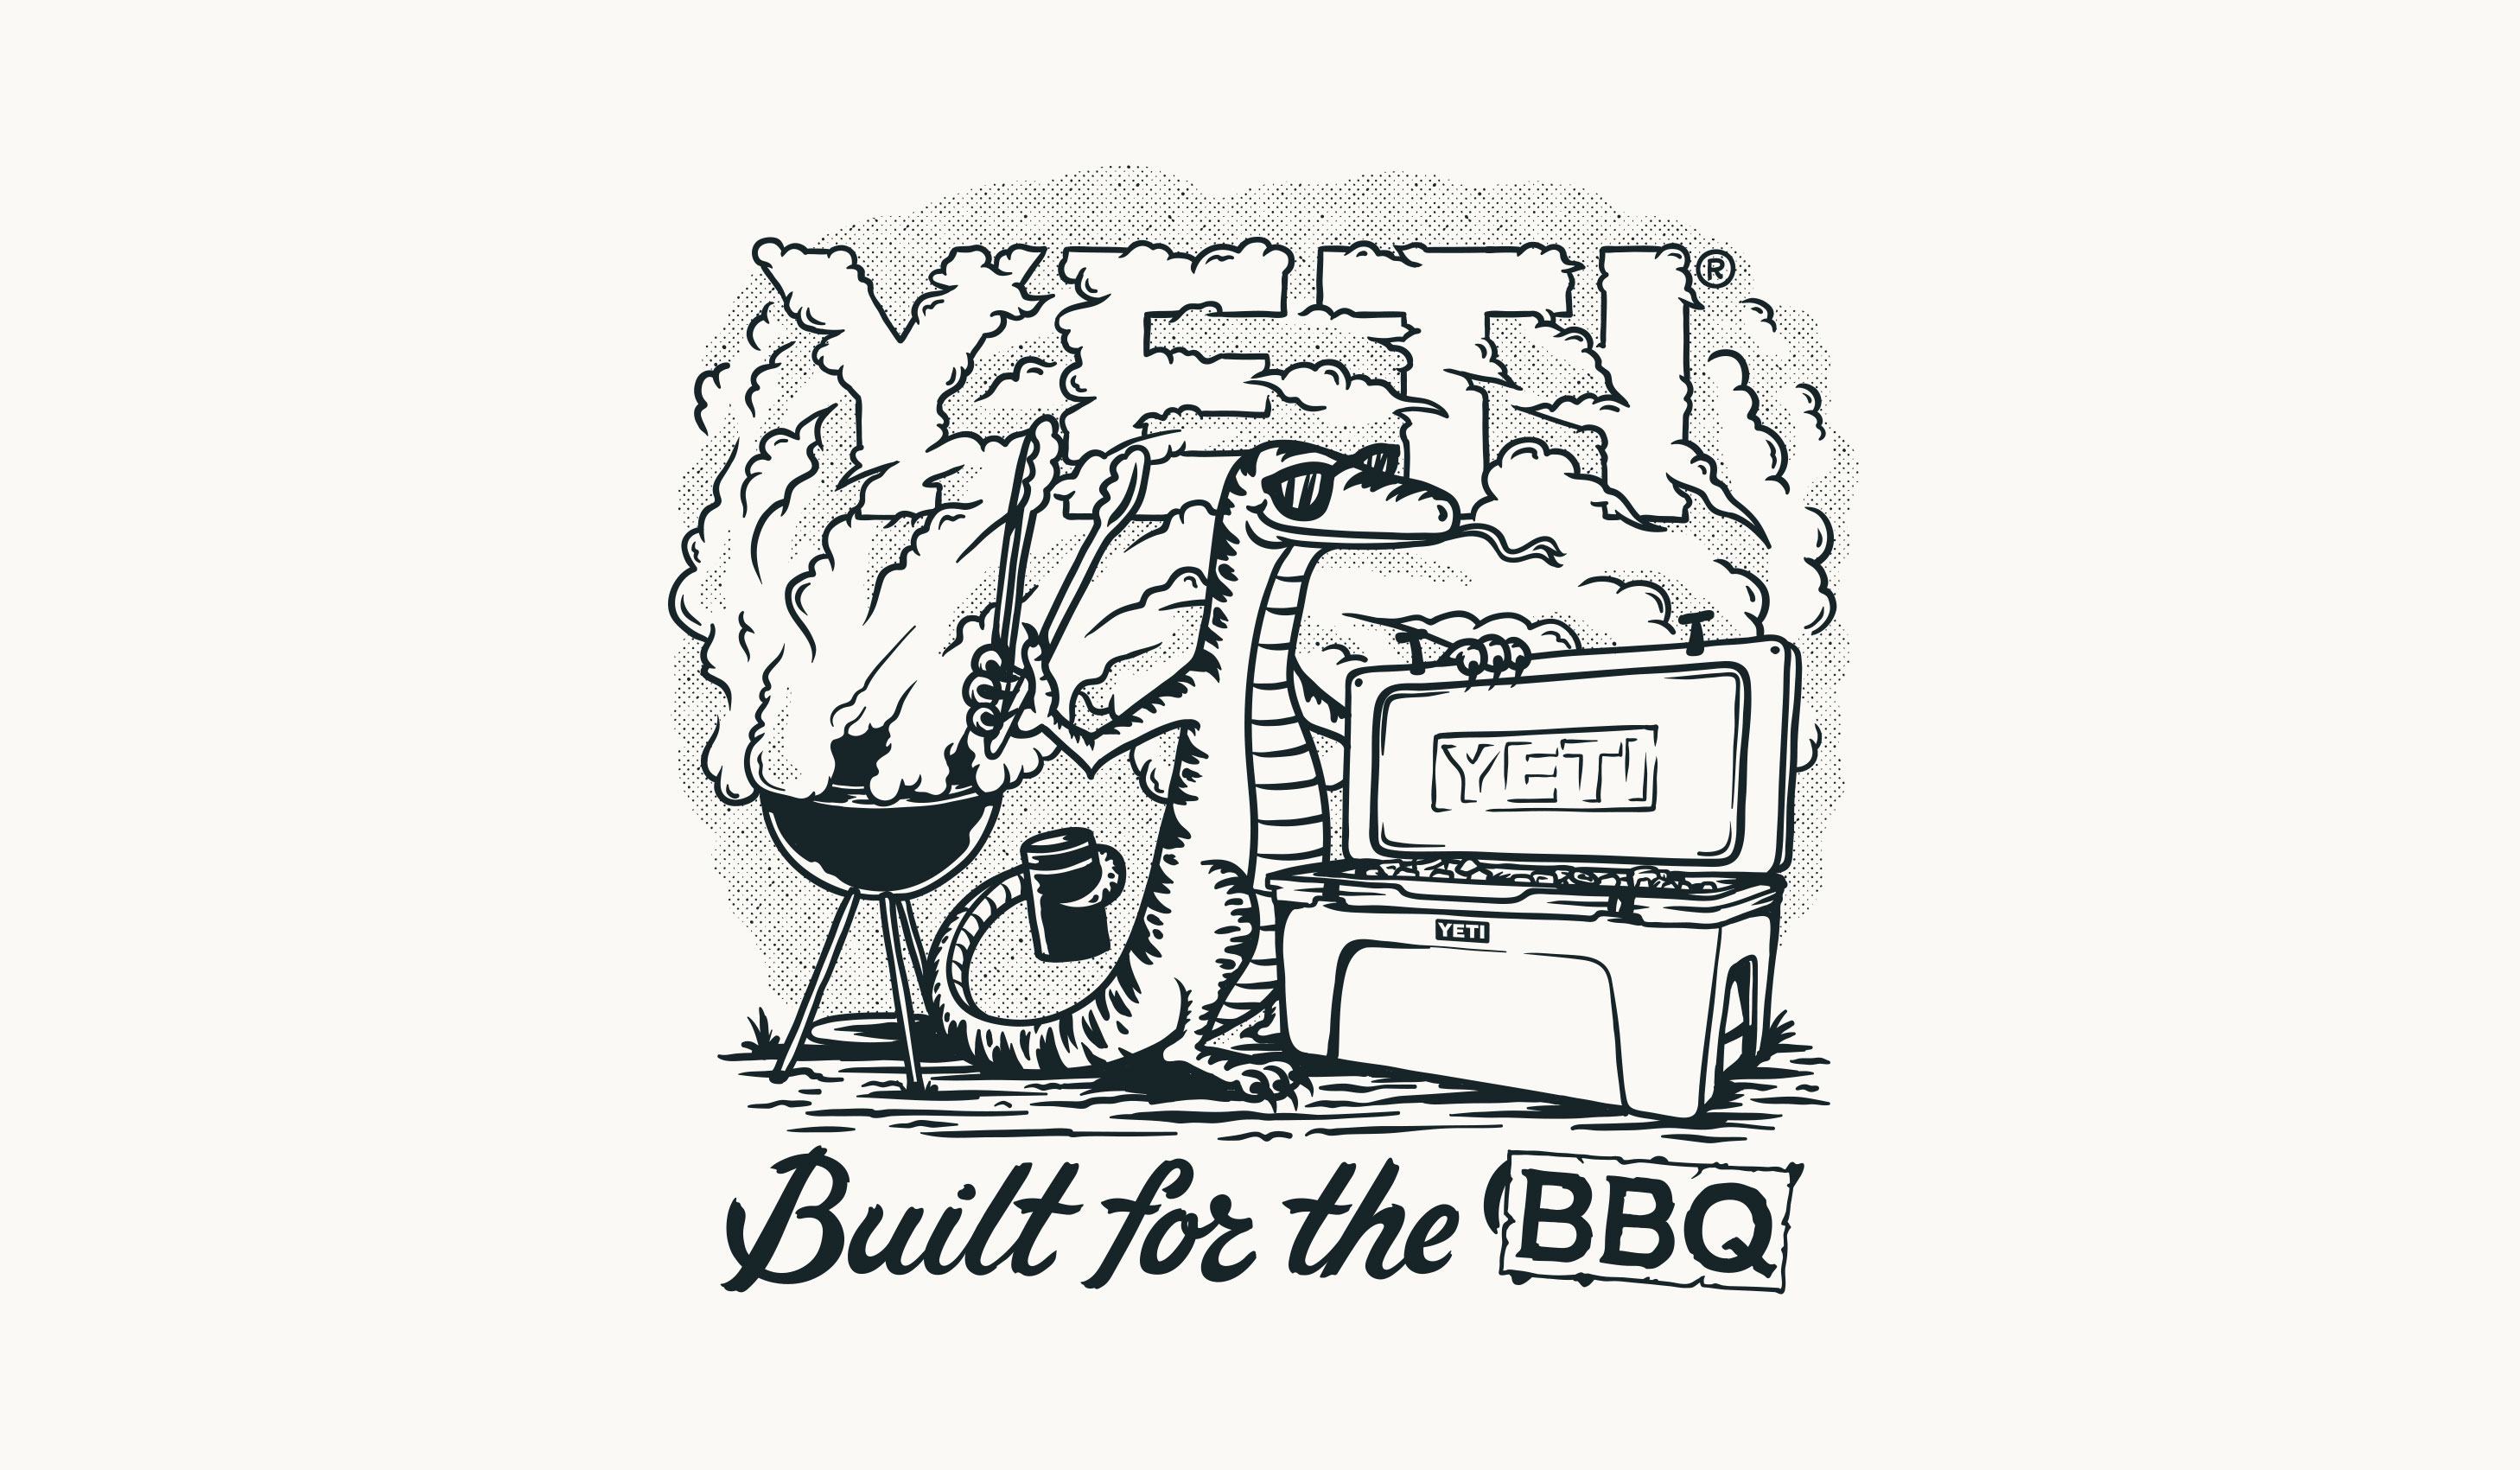 An illustrated graphic where a lizard reaches into the esky while the BBQ smokes in the background. The smoke spells 'YETI'.